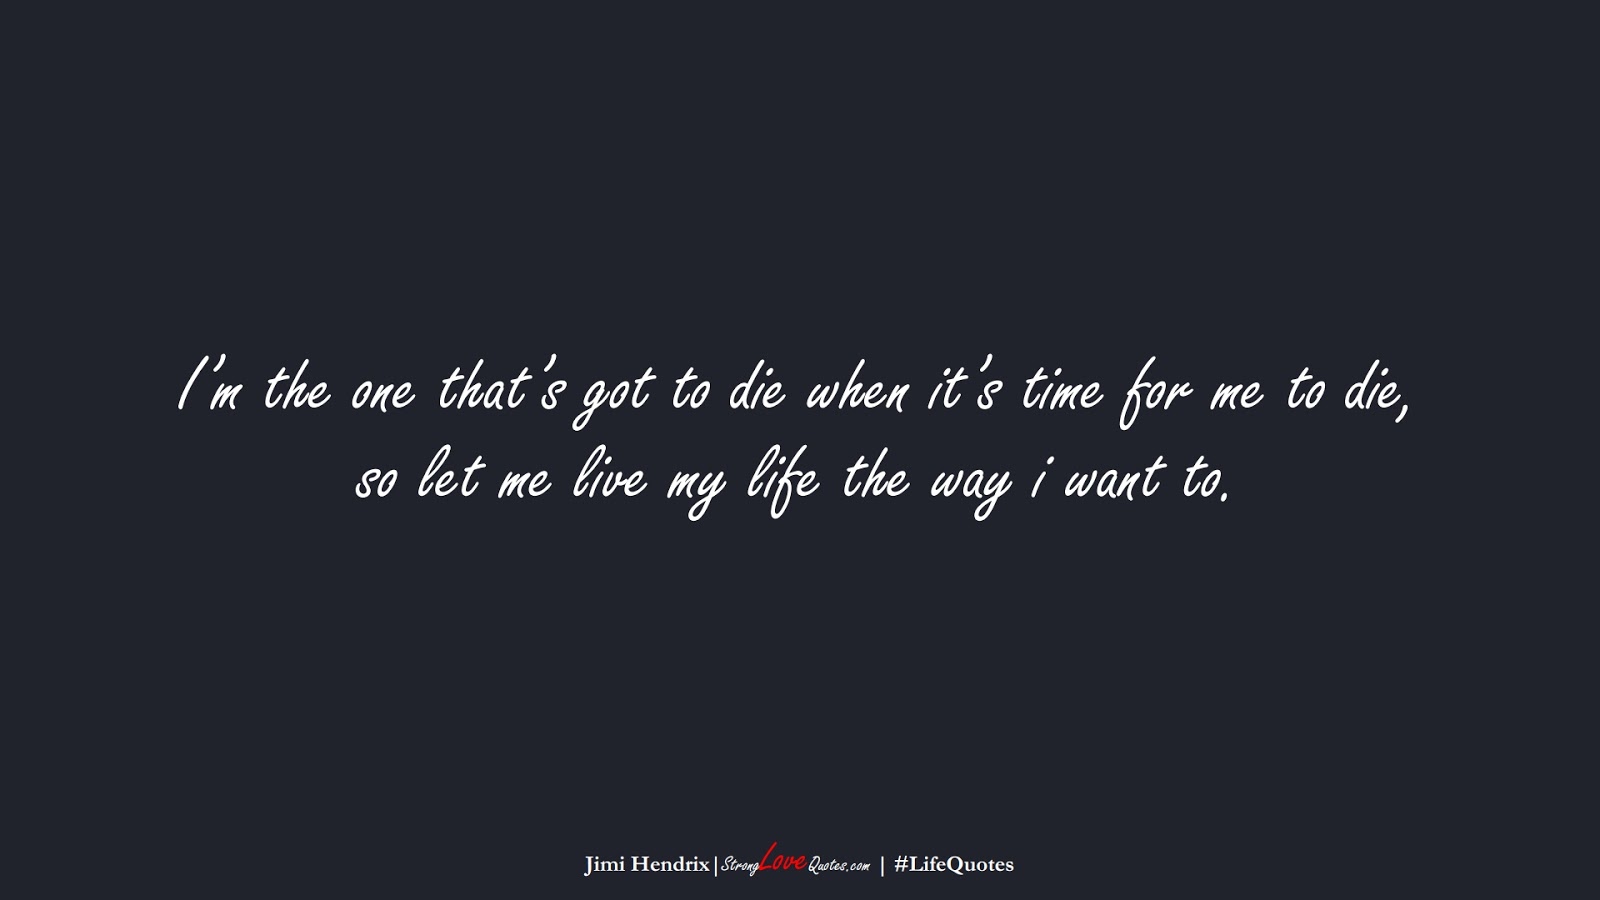 I’m the one that’s got to die when it’s time for me to die, so let me live my life the way i want to. (Jimi Hendrix);  #LifeQuotes